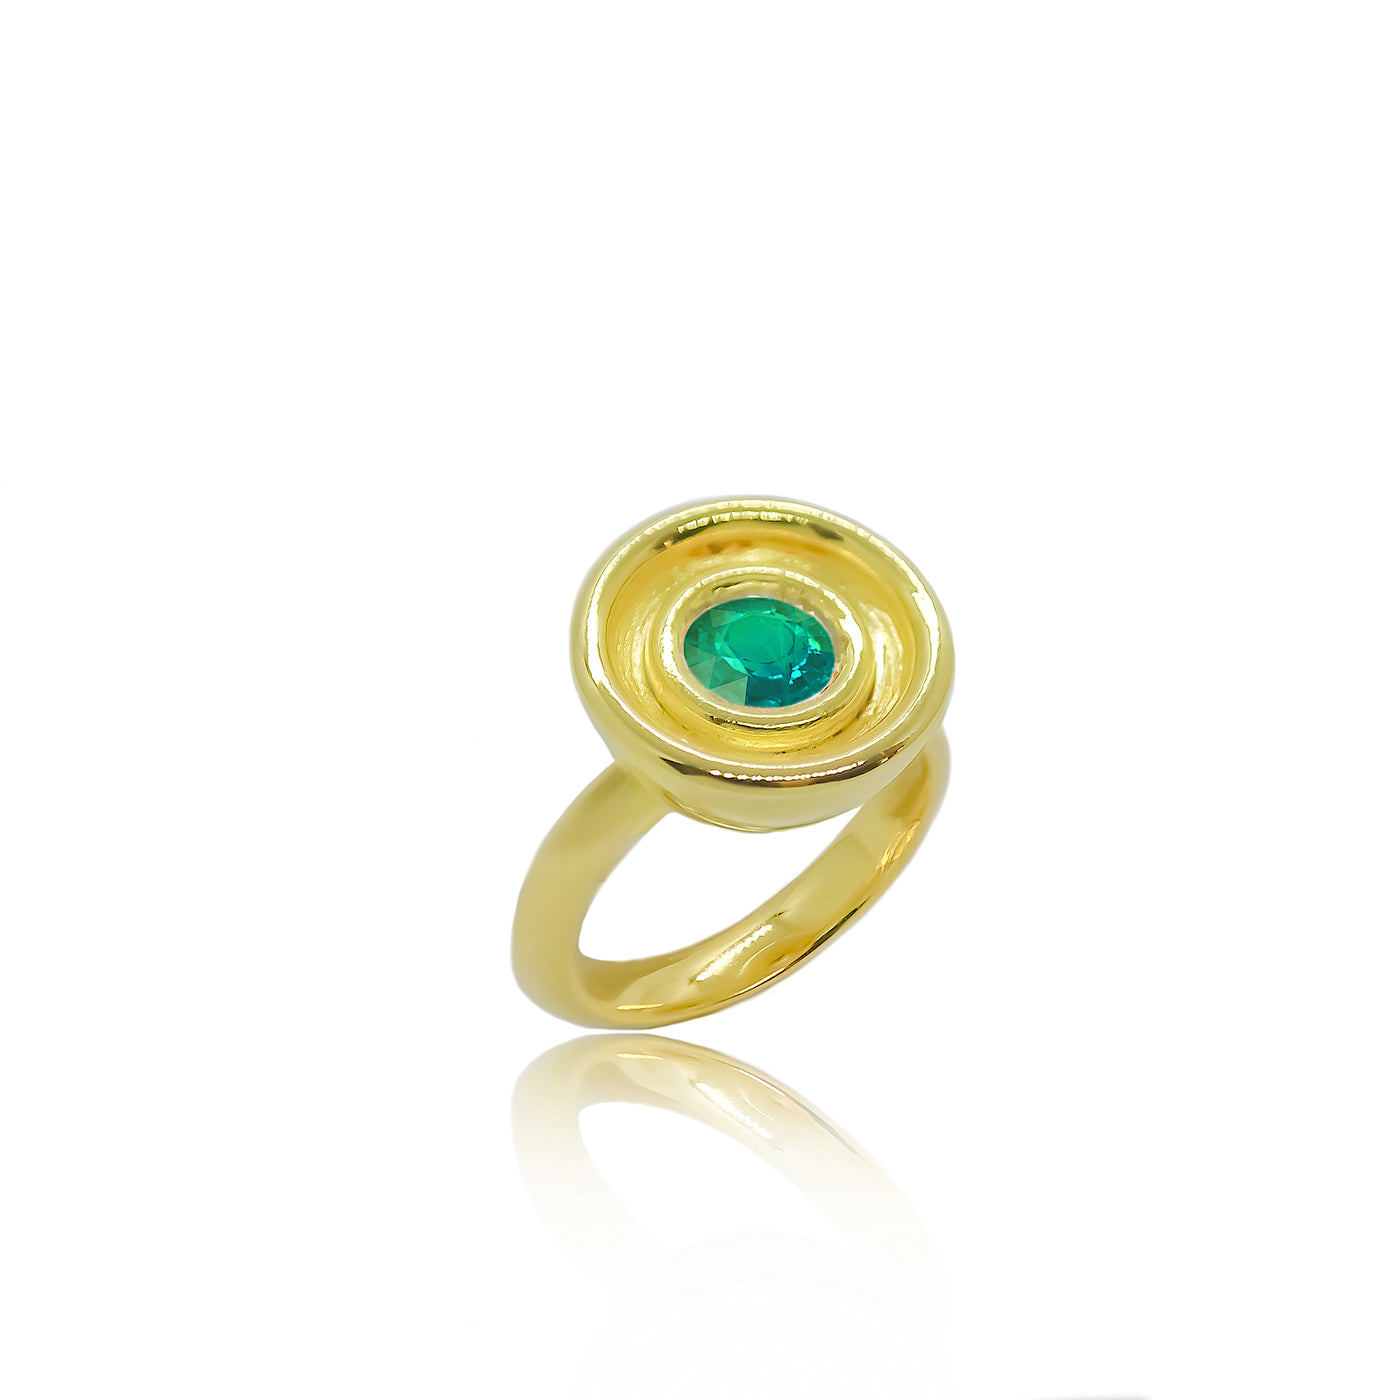 Gold solitaire cocktail ring with emerald from Atelier ORMAN